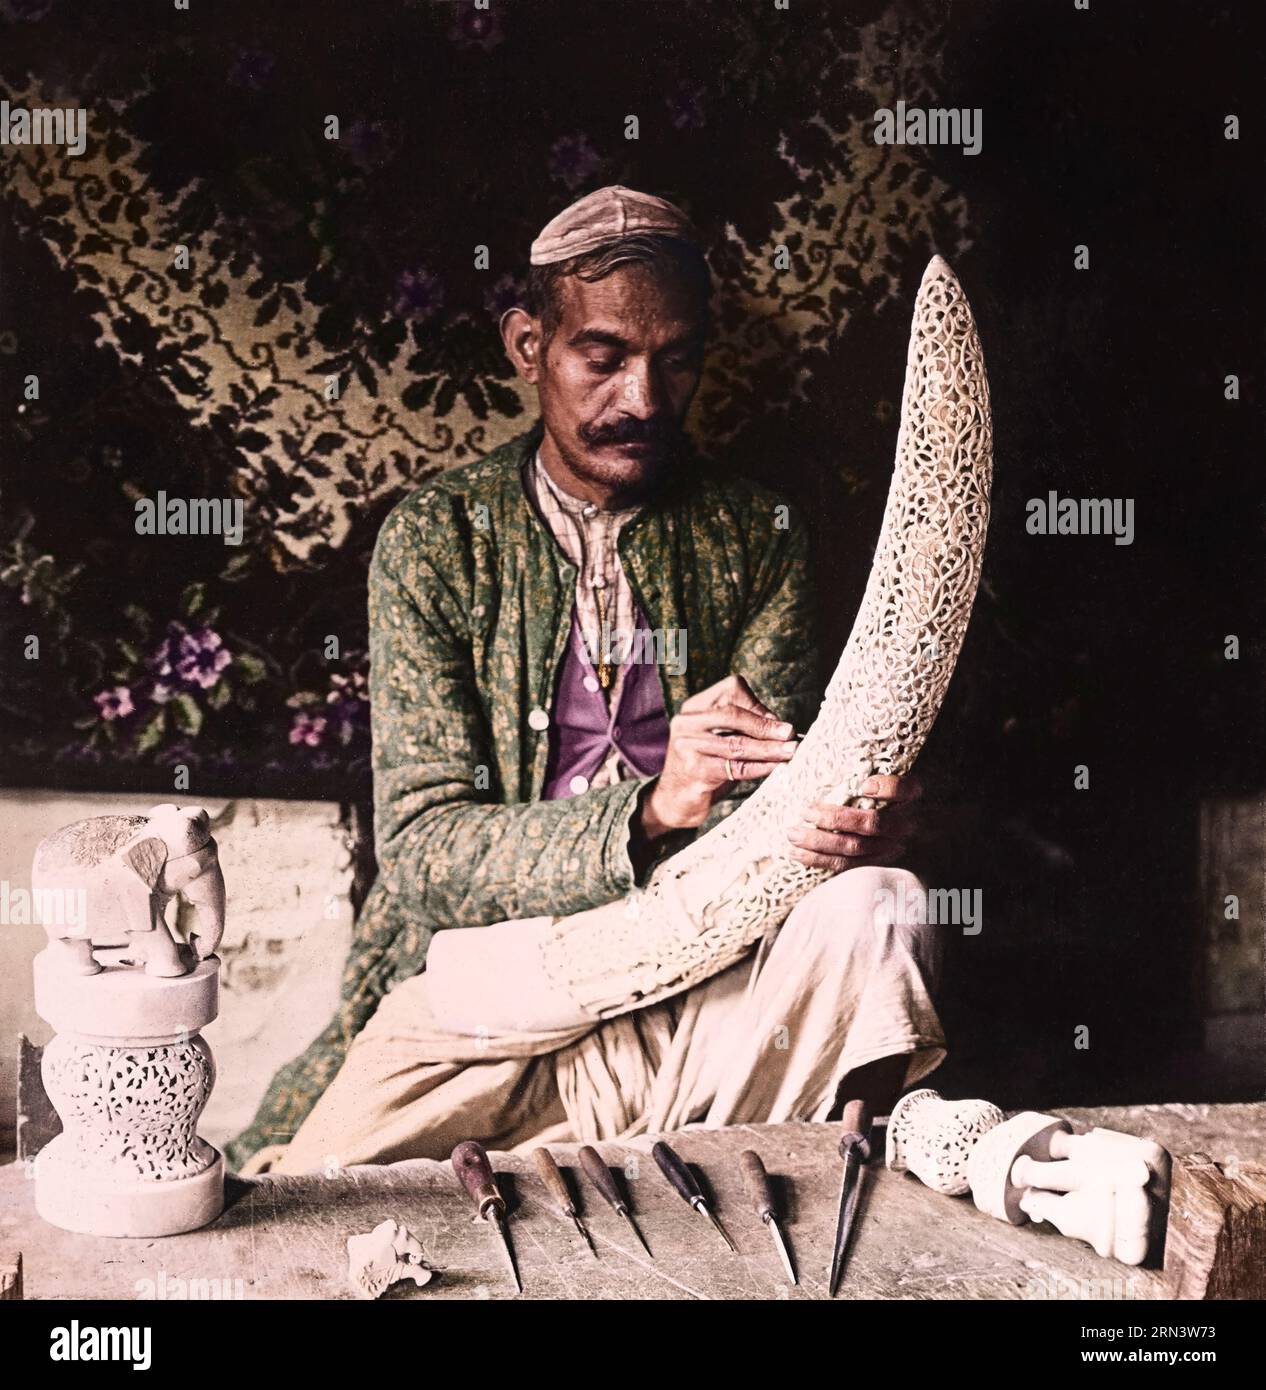 An Indian artist carving an elephant's tusk, in one of the workshops of Delhi, India. Year: 1907. By H.C. White Co. publishers. Stock Photo